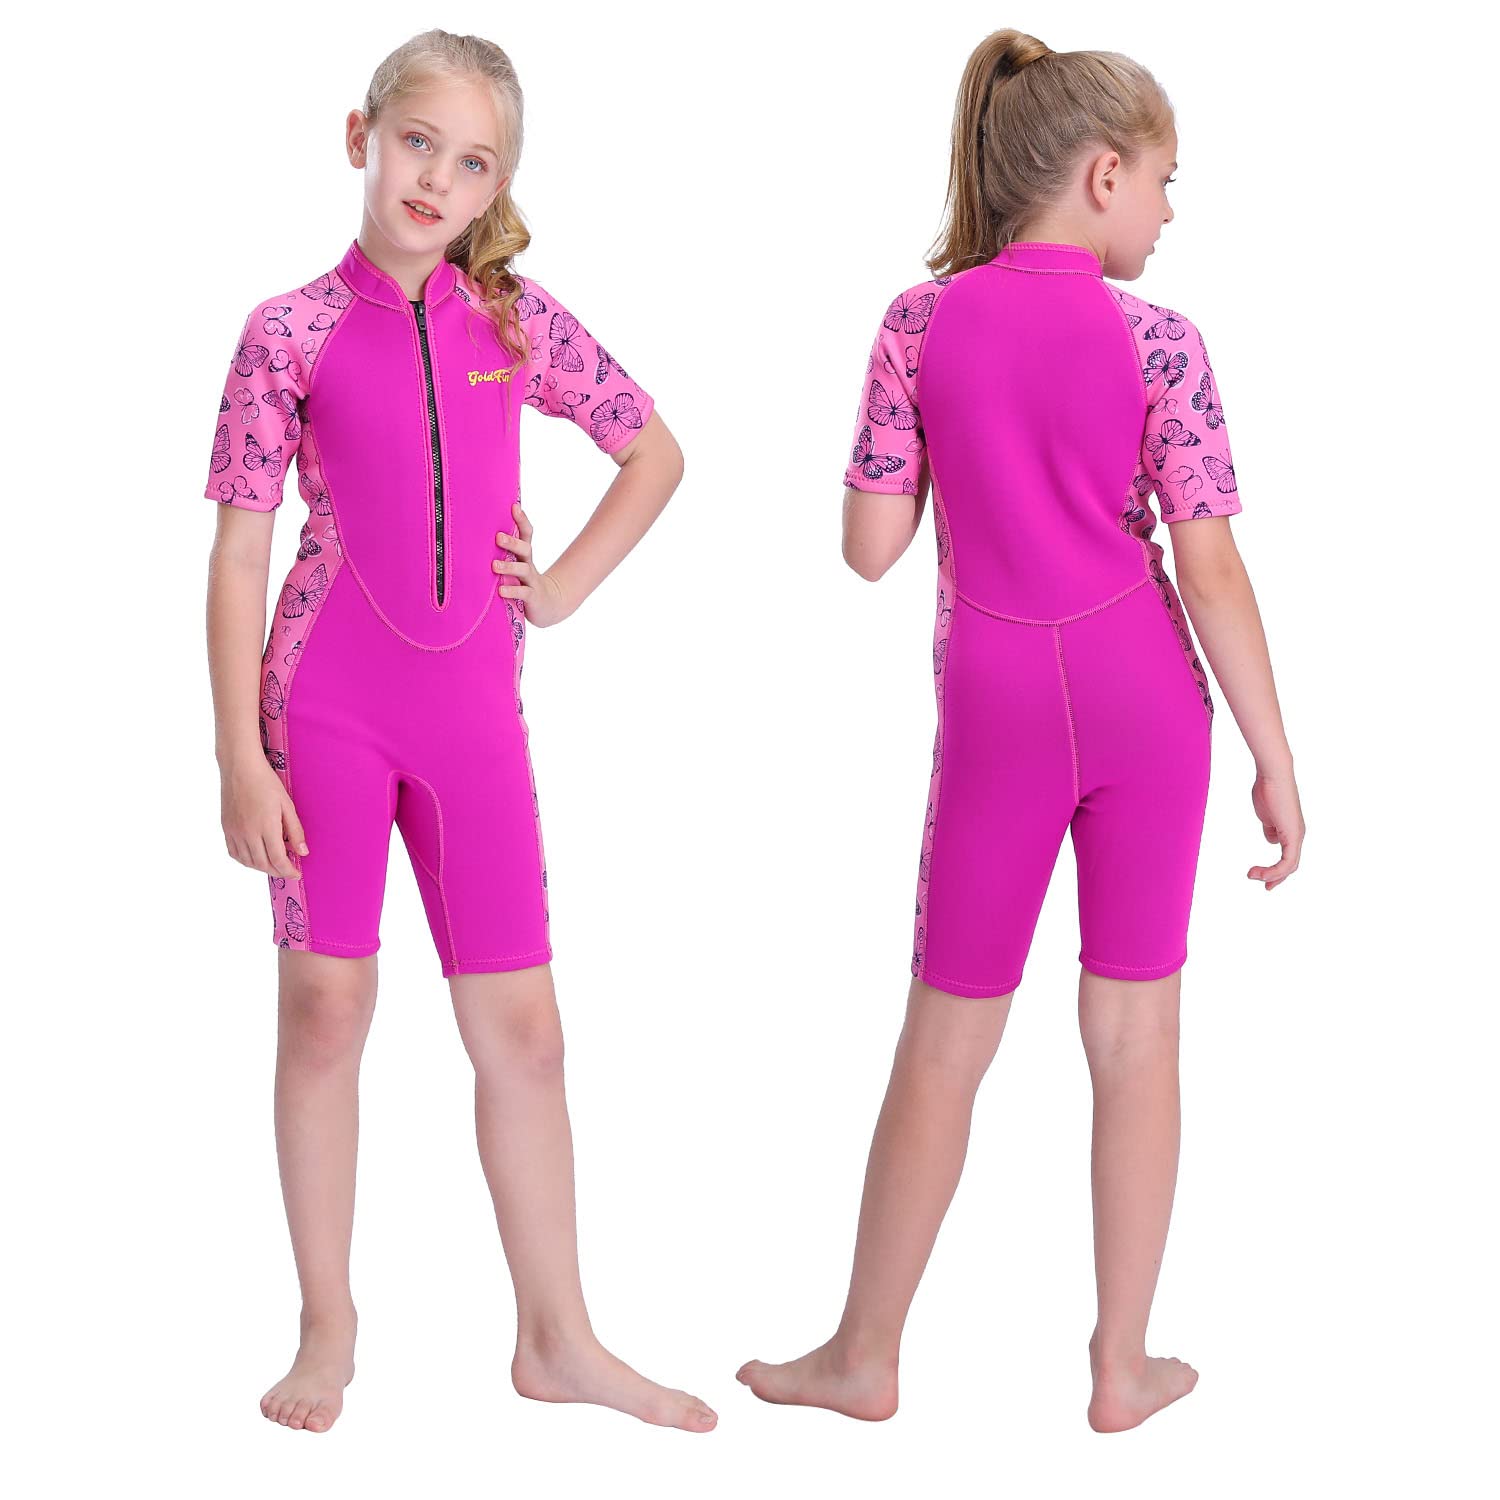 Goldfin Kids Wetsuits for Girls Boys, 2mm Toddler Shorty Wetsuit Youth  Neoprene Suit Front Zip Keep Warm for Water Aerobics Diving Surfing Swimming  1.Girls - Butterfly 4